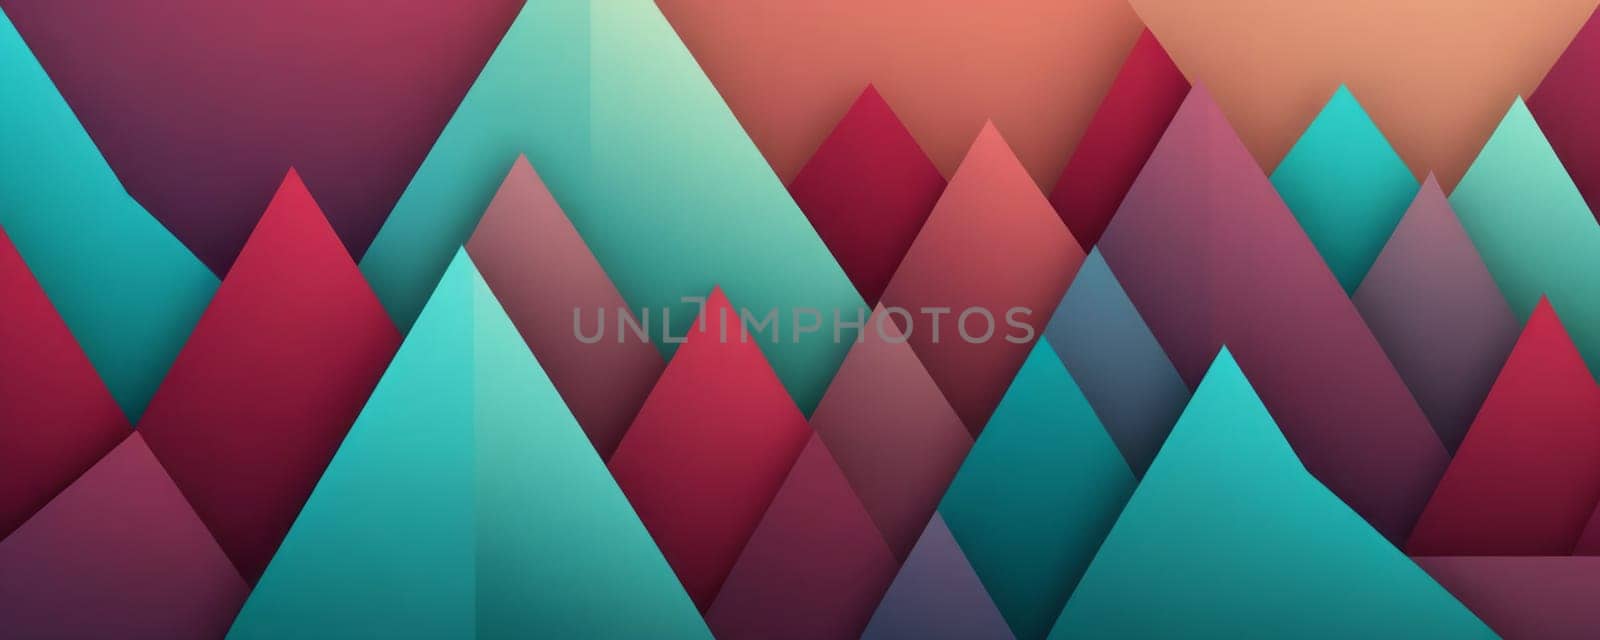 Buttress Shapes in Aqua Maroon by nkotlyar